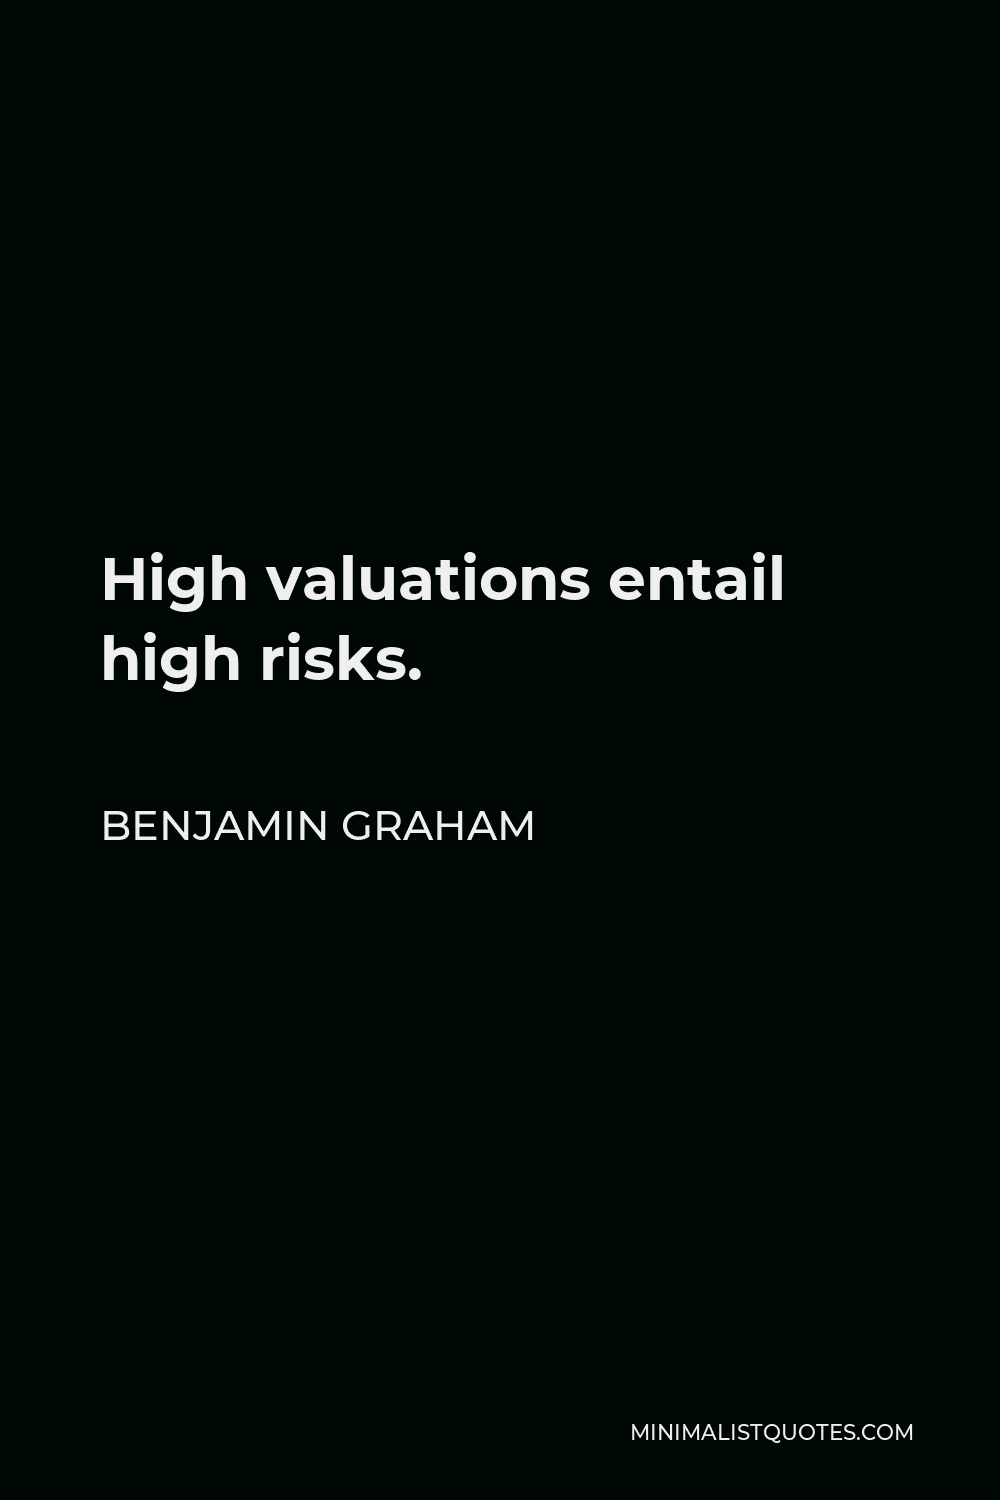 Benjamin Graham Quote - High valuations entail high risks.